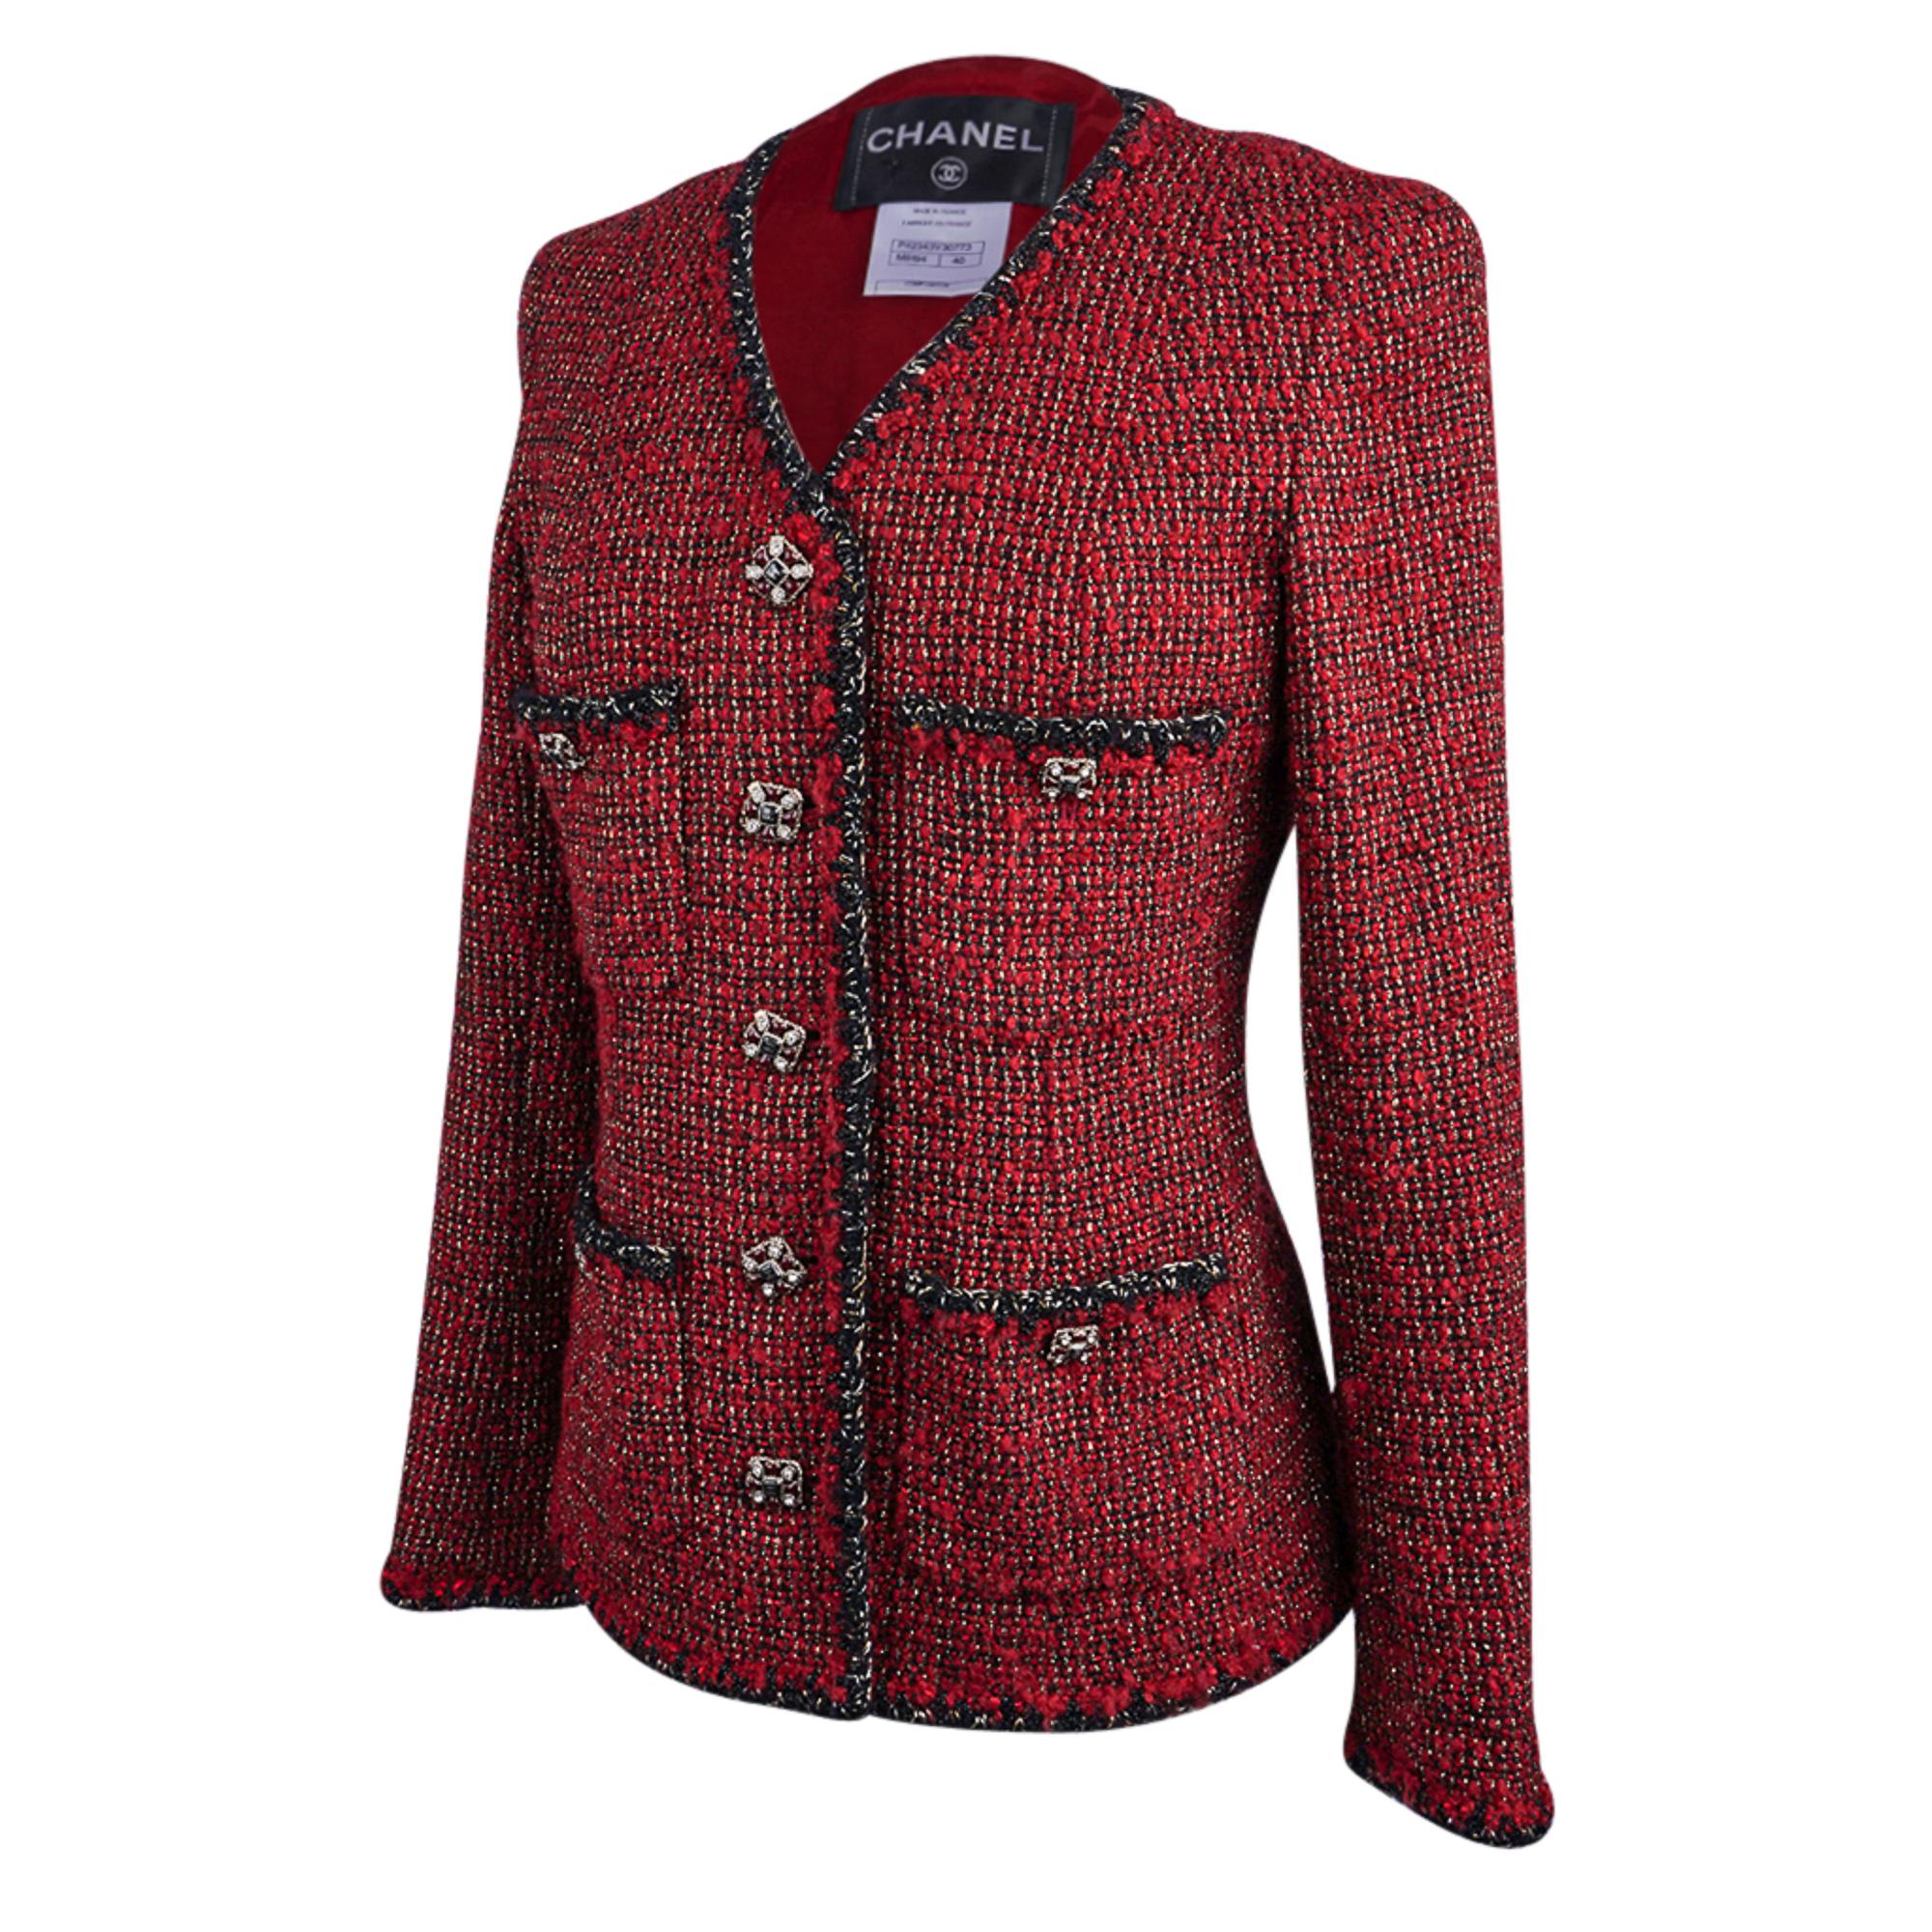 Guaranteed authentic Chanel 11A single breast Red and Black tweed jacket.
Beautiful tweed with Burgundy Red and Black with Gold metallic thread running through it.
V neck with 4 patch pockets.
5 Gripoix jeweled CC logo buttons in front and 1 on each